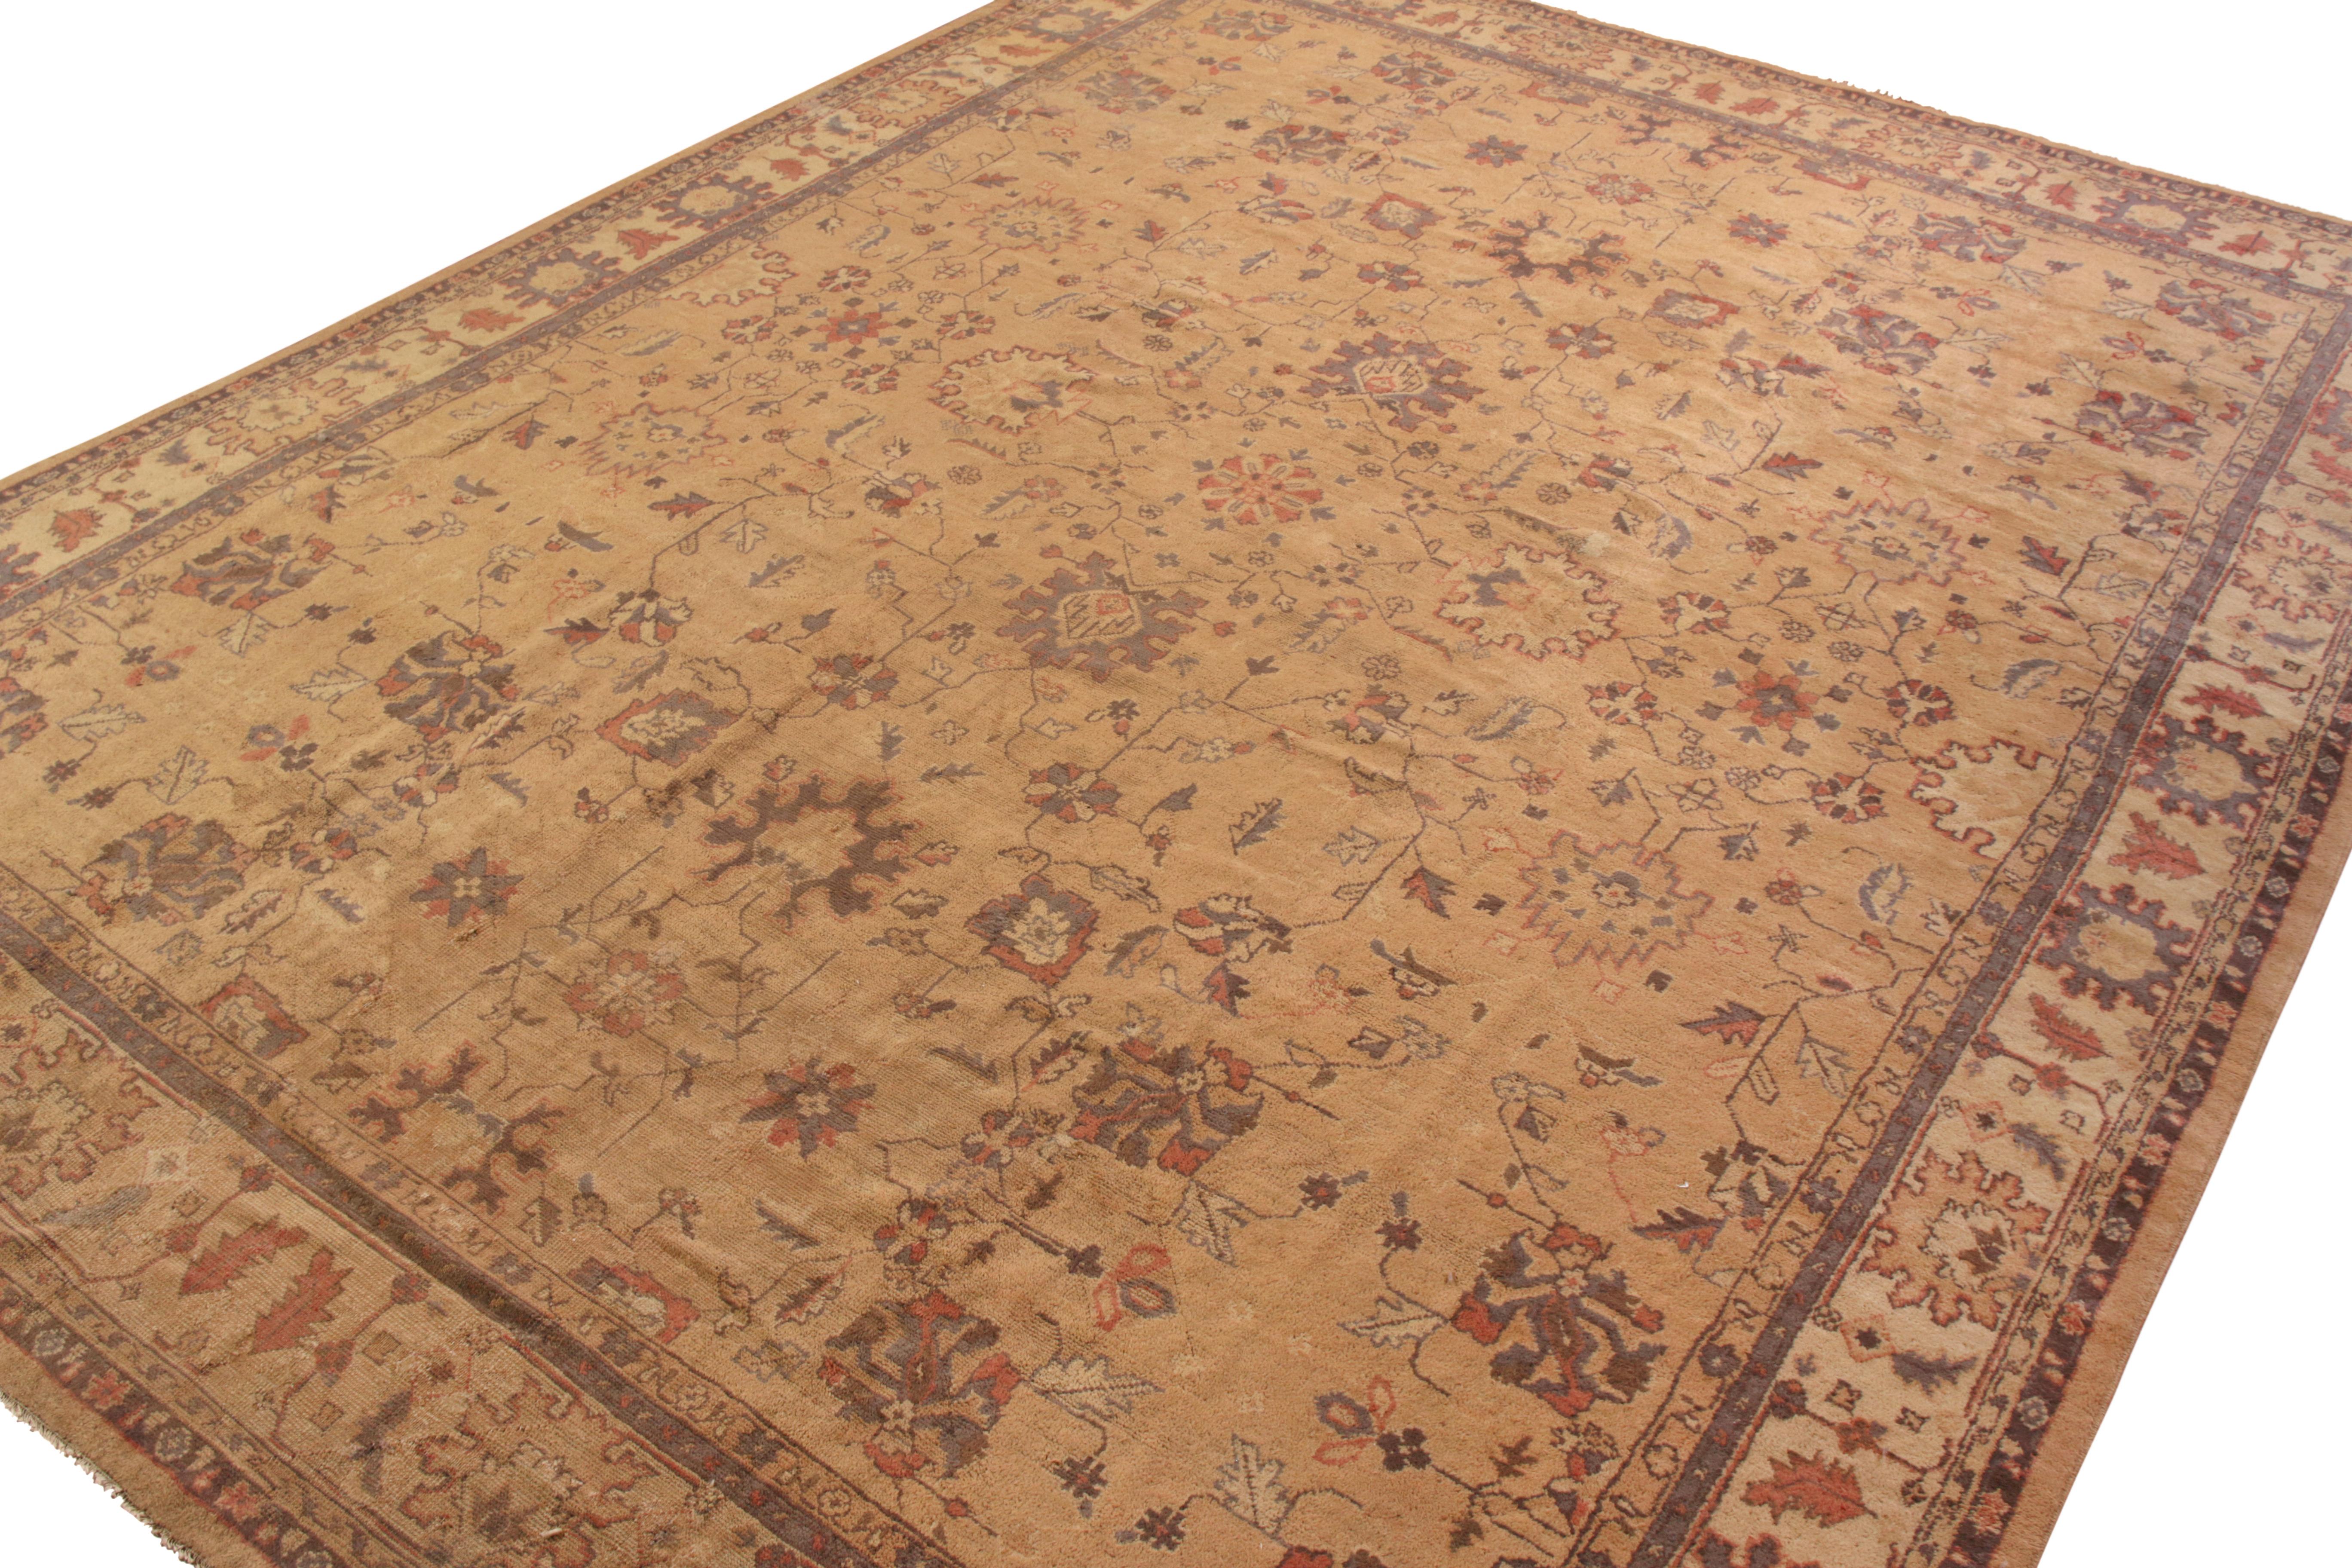 Indian Antique Agra Rug in Beige-Brown and Red Floral Pattern by Rug & Kilim For Sale